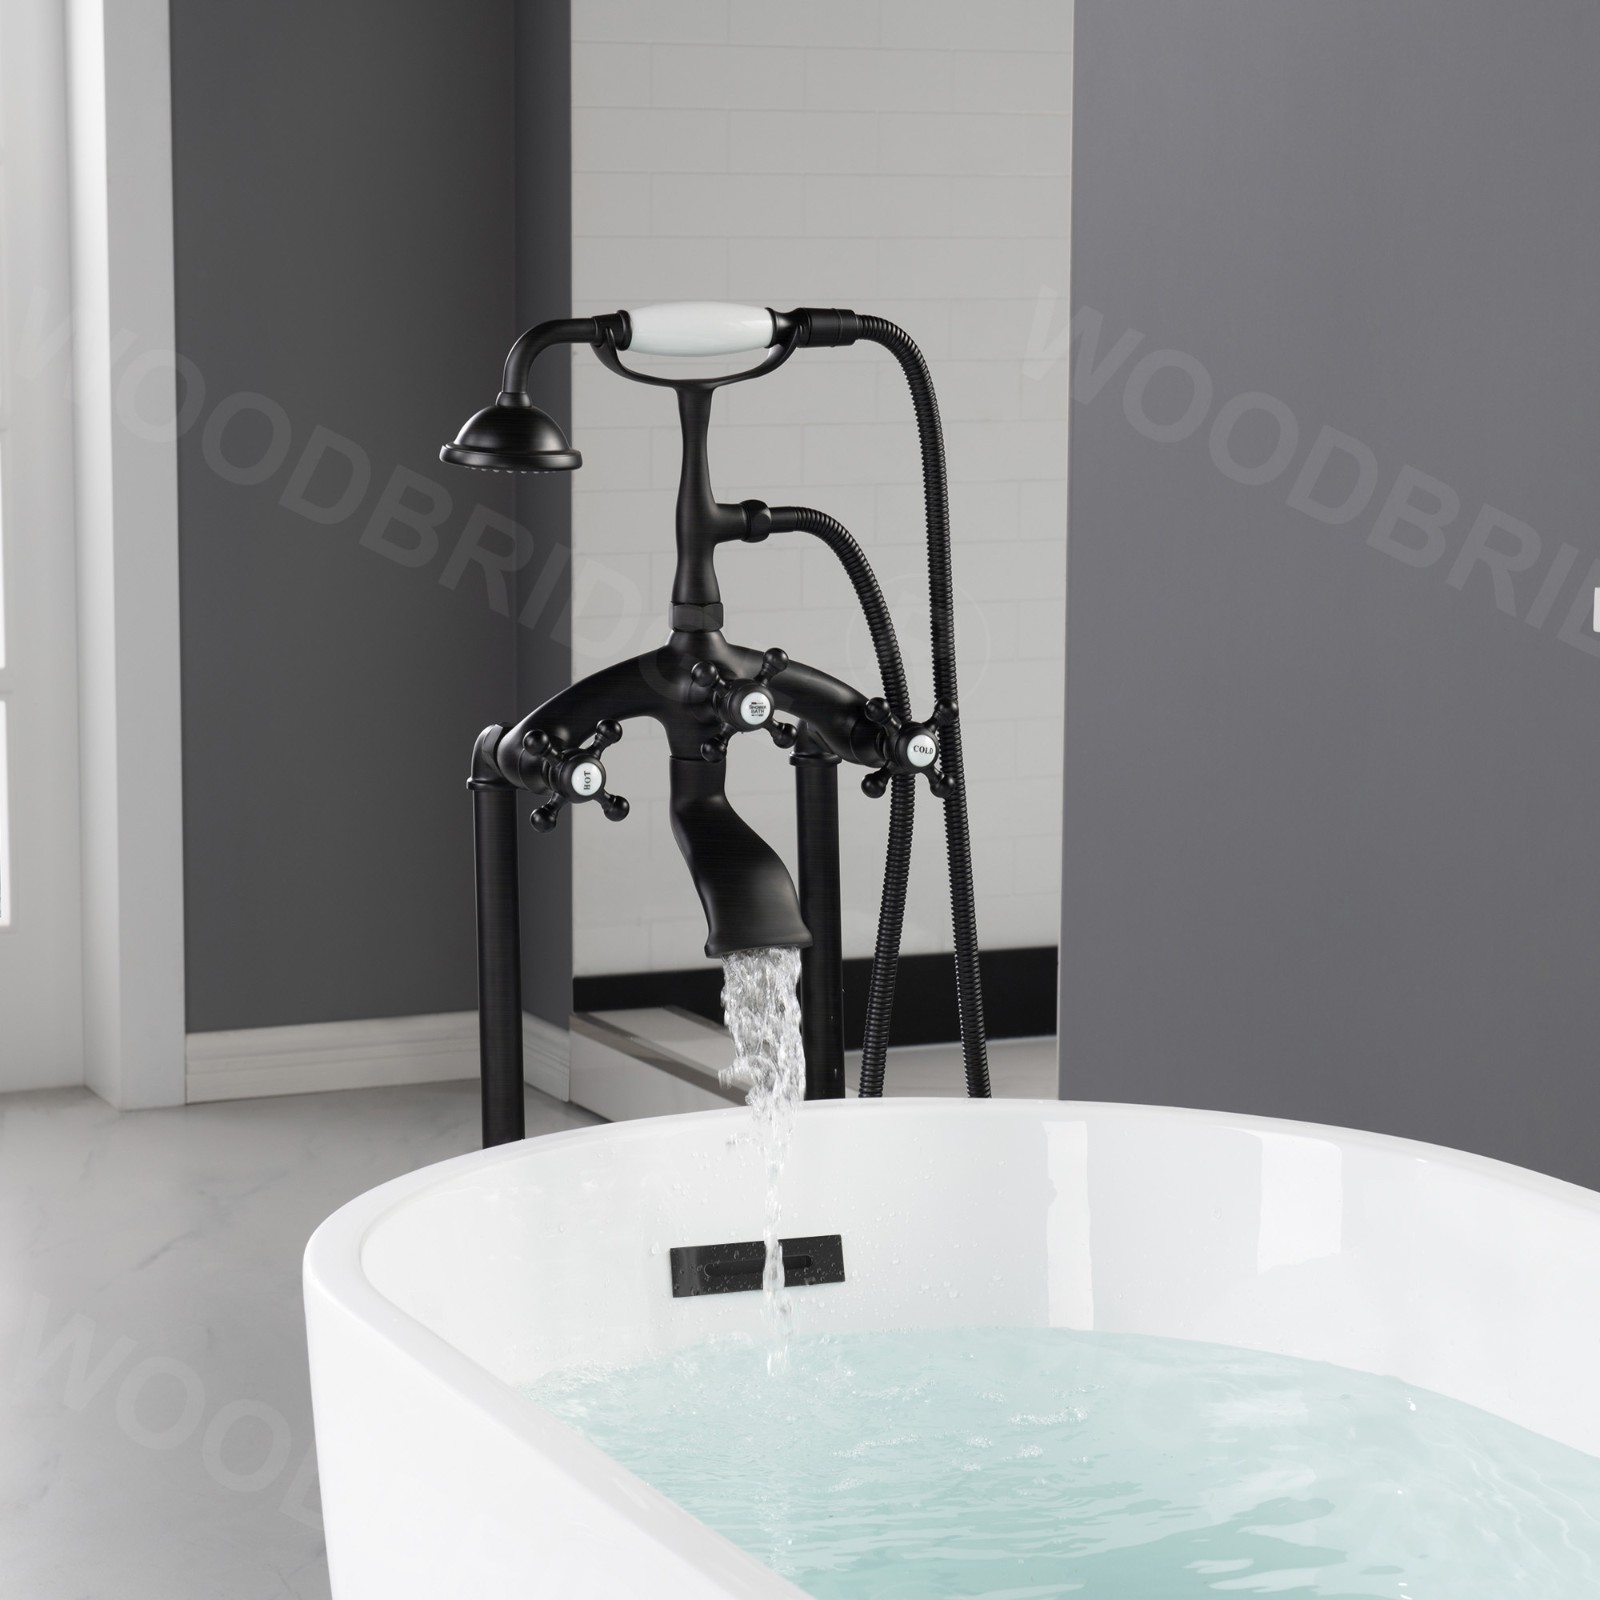  WOODBRIDGE F0029ORB Freestanding Clawfoot Tub Filler Faucet with Hand Shower and Hose in Oil Rubbed Bronze_4560